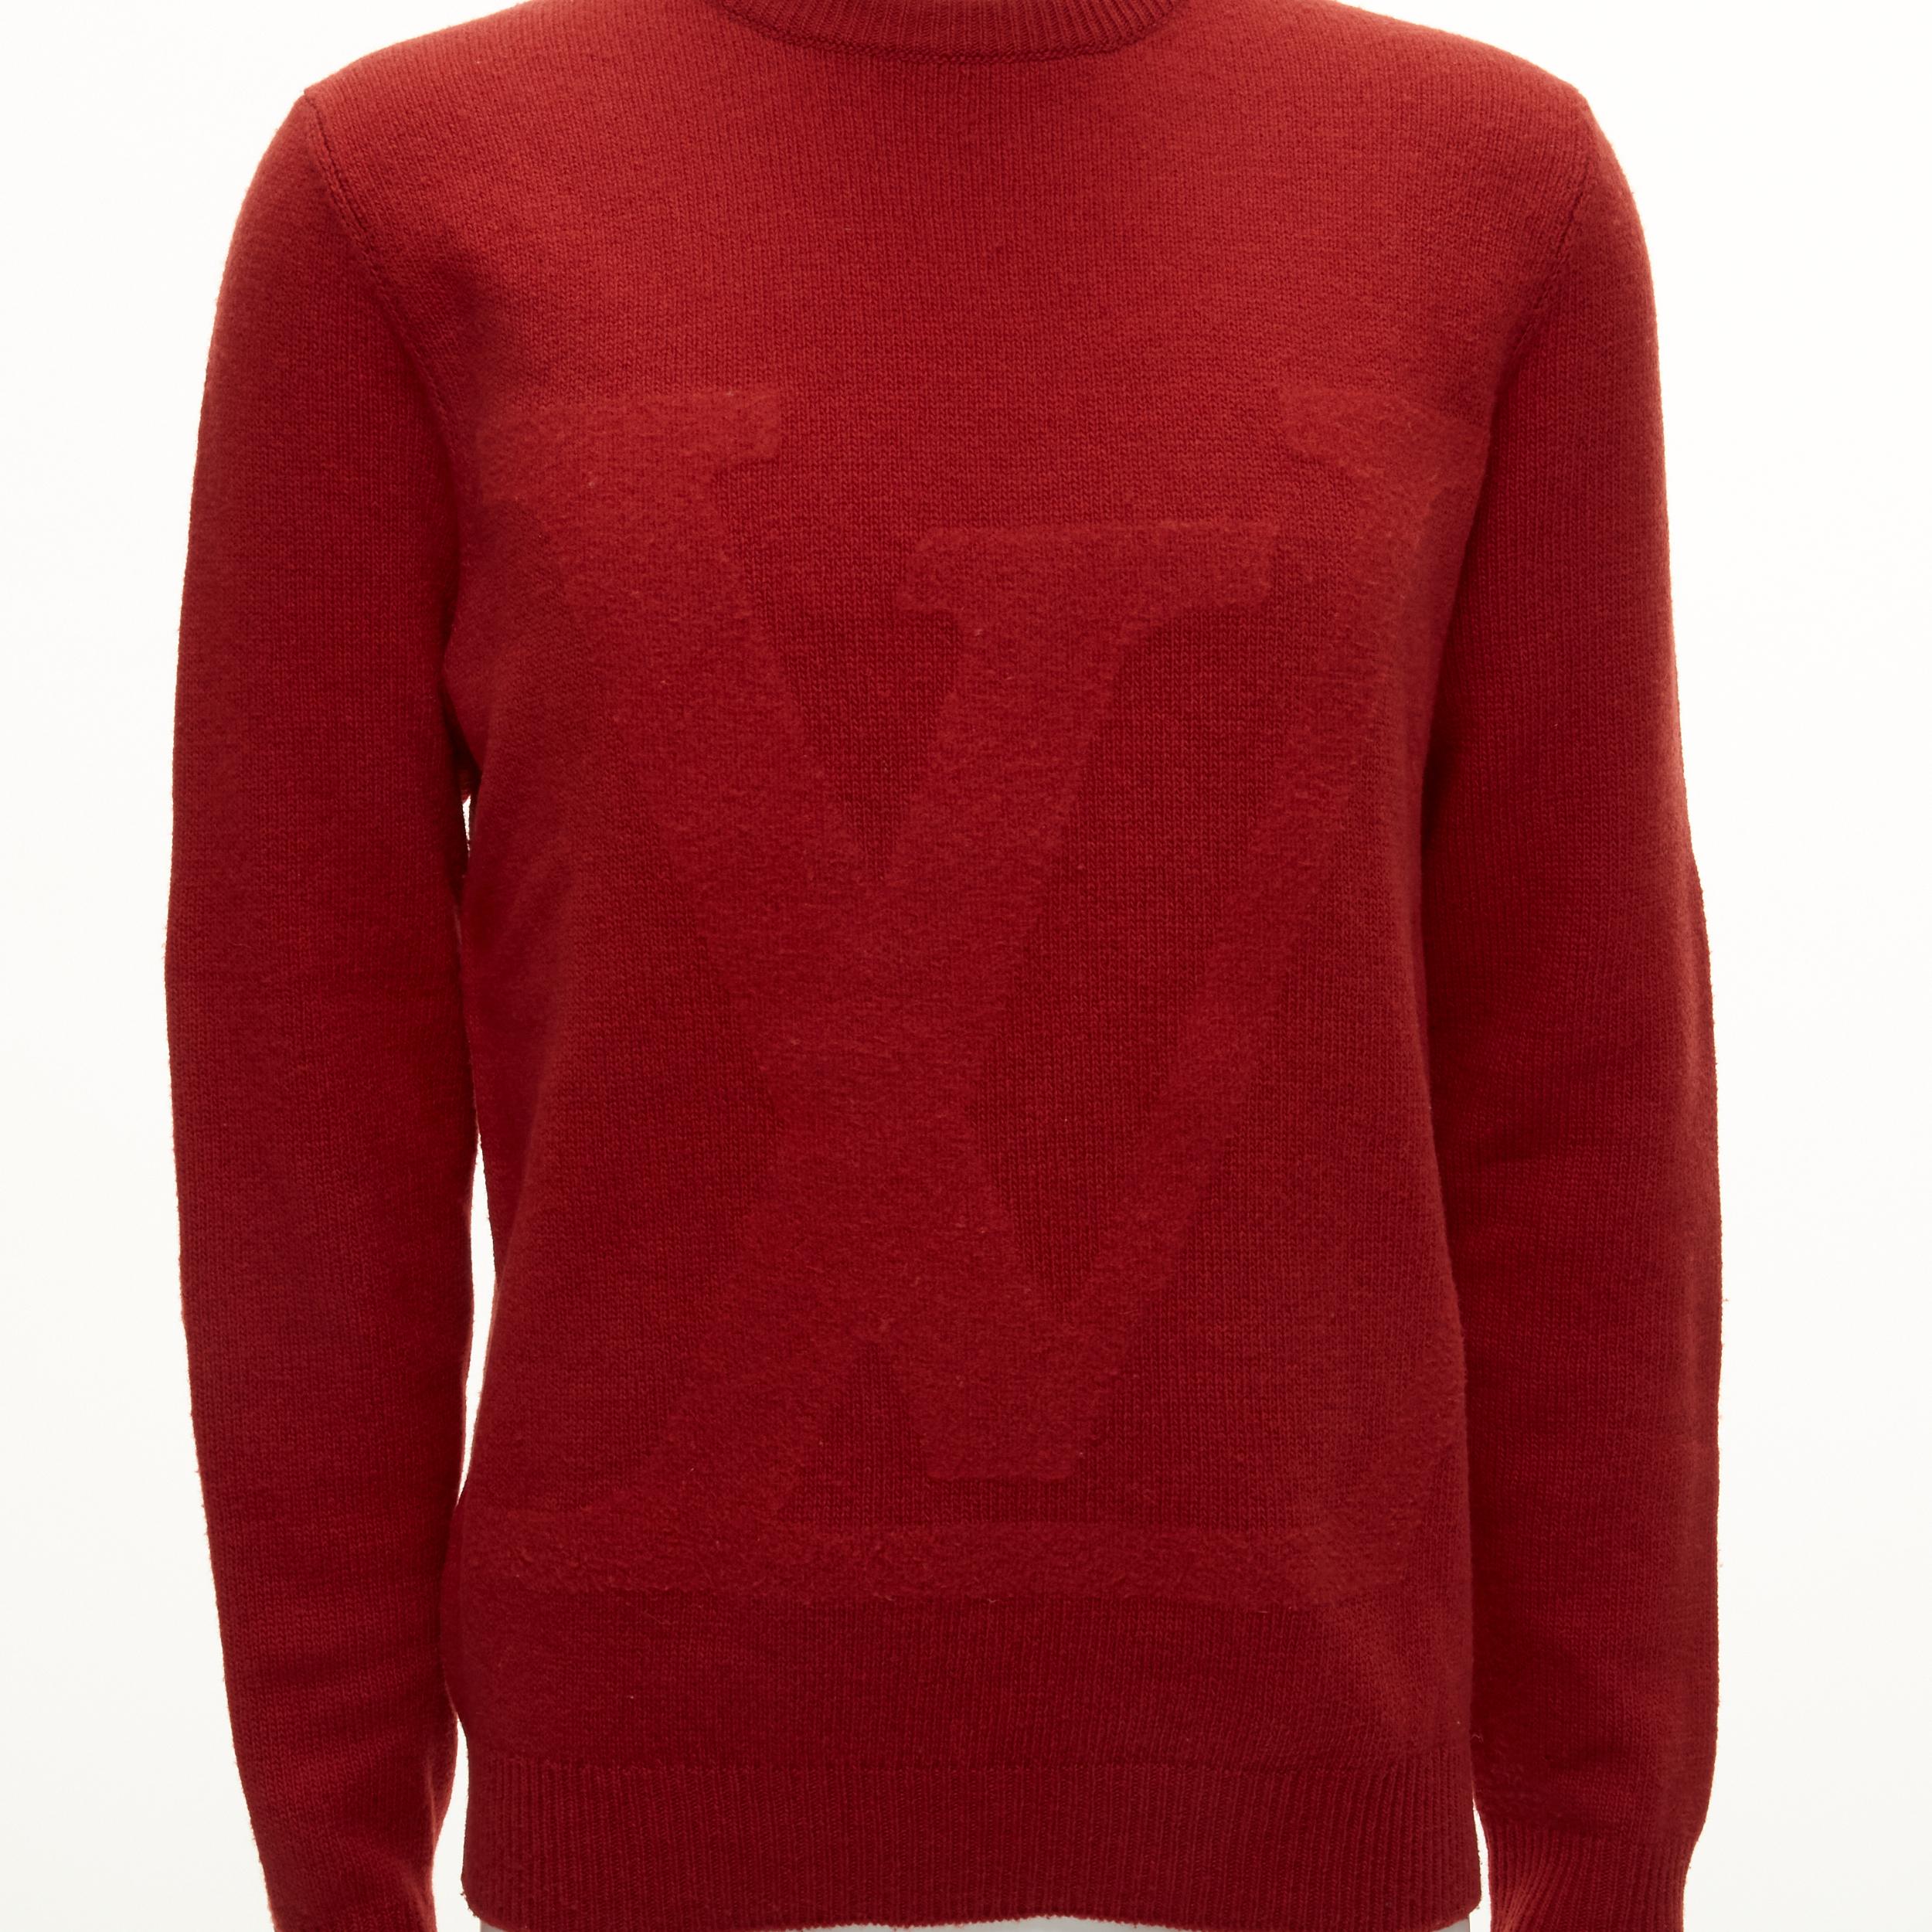 LOUIS VUITTON 100% wool red LV oversized logo long sleeve crew sweater M
Reference: TGAS/D00060
Brand: Louis Vuitton
Material: Wool
Color: Red
Pattern: Solid
Closure: Pullover
Made in: Italy

CONDITION:
Condition: Very good, this item was pre-owned